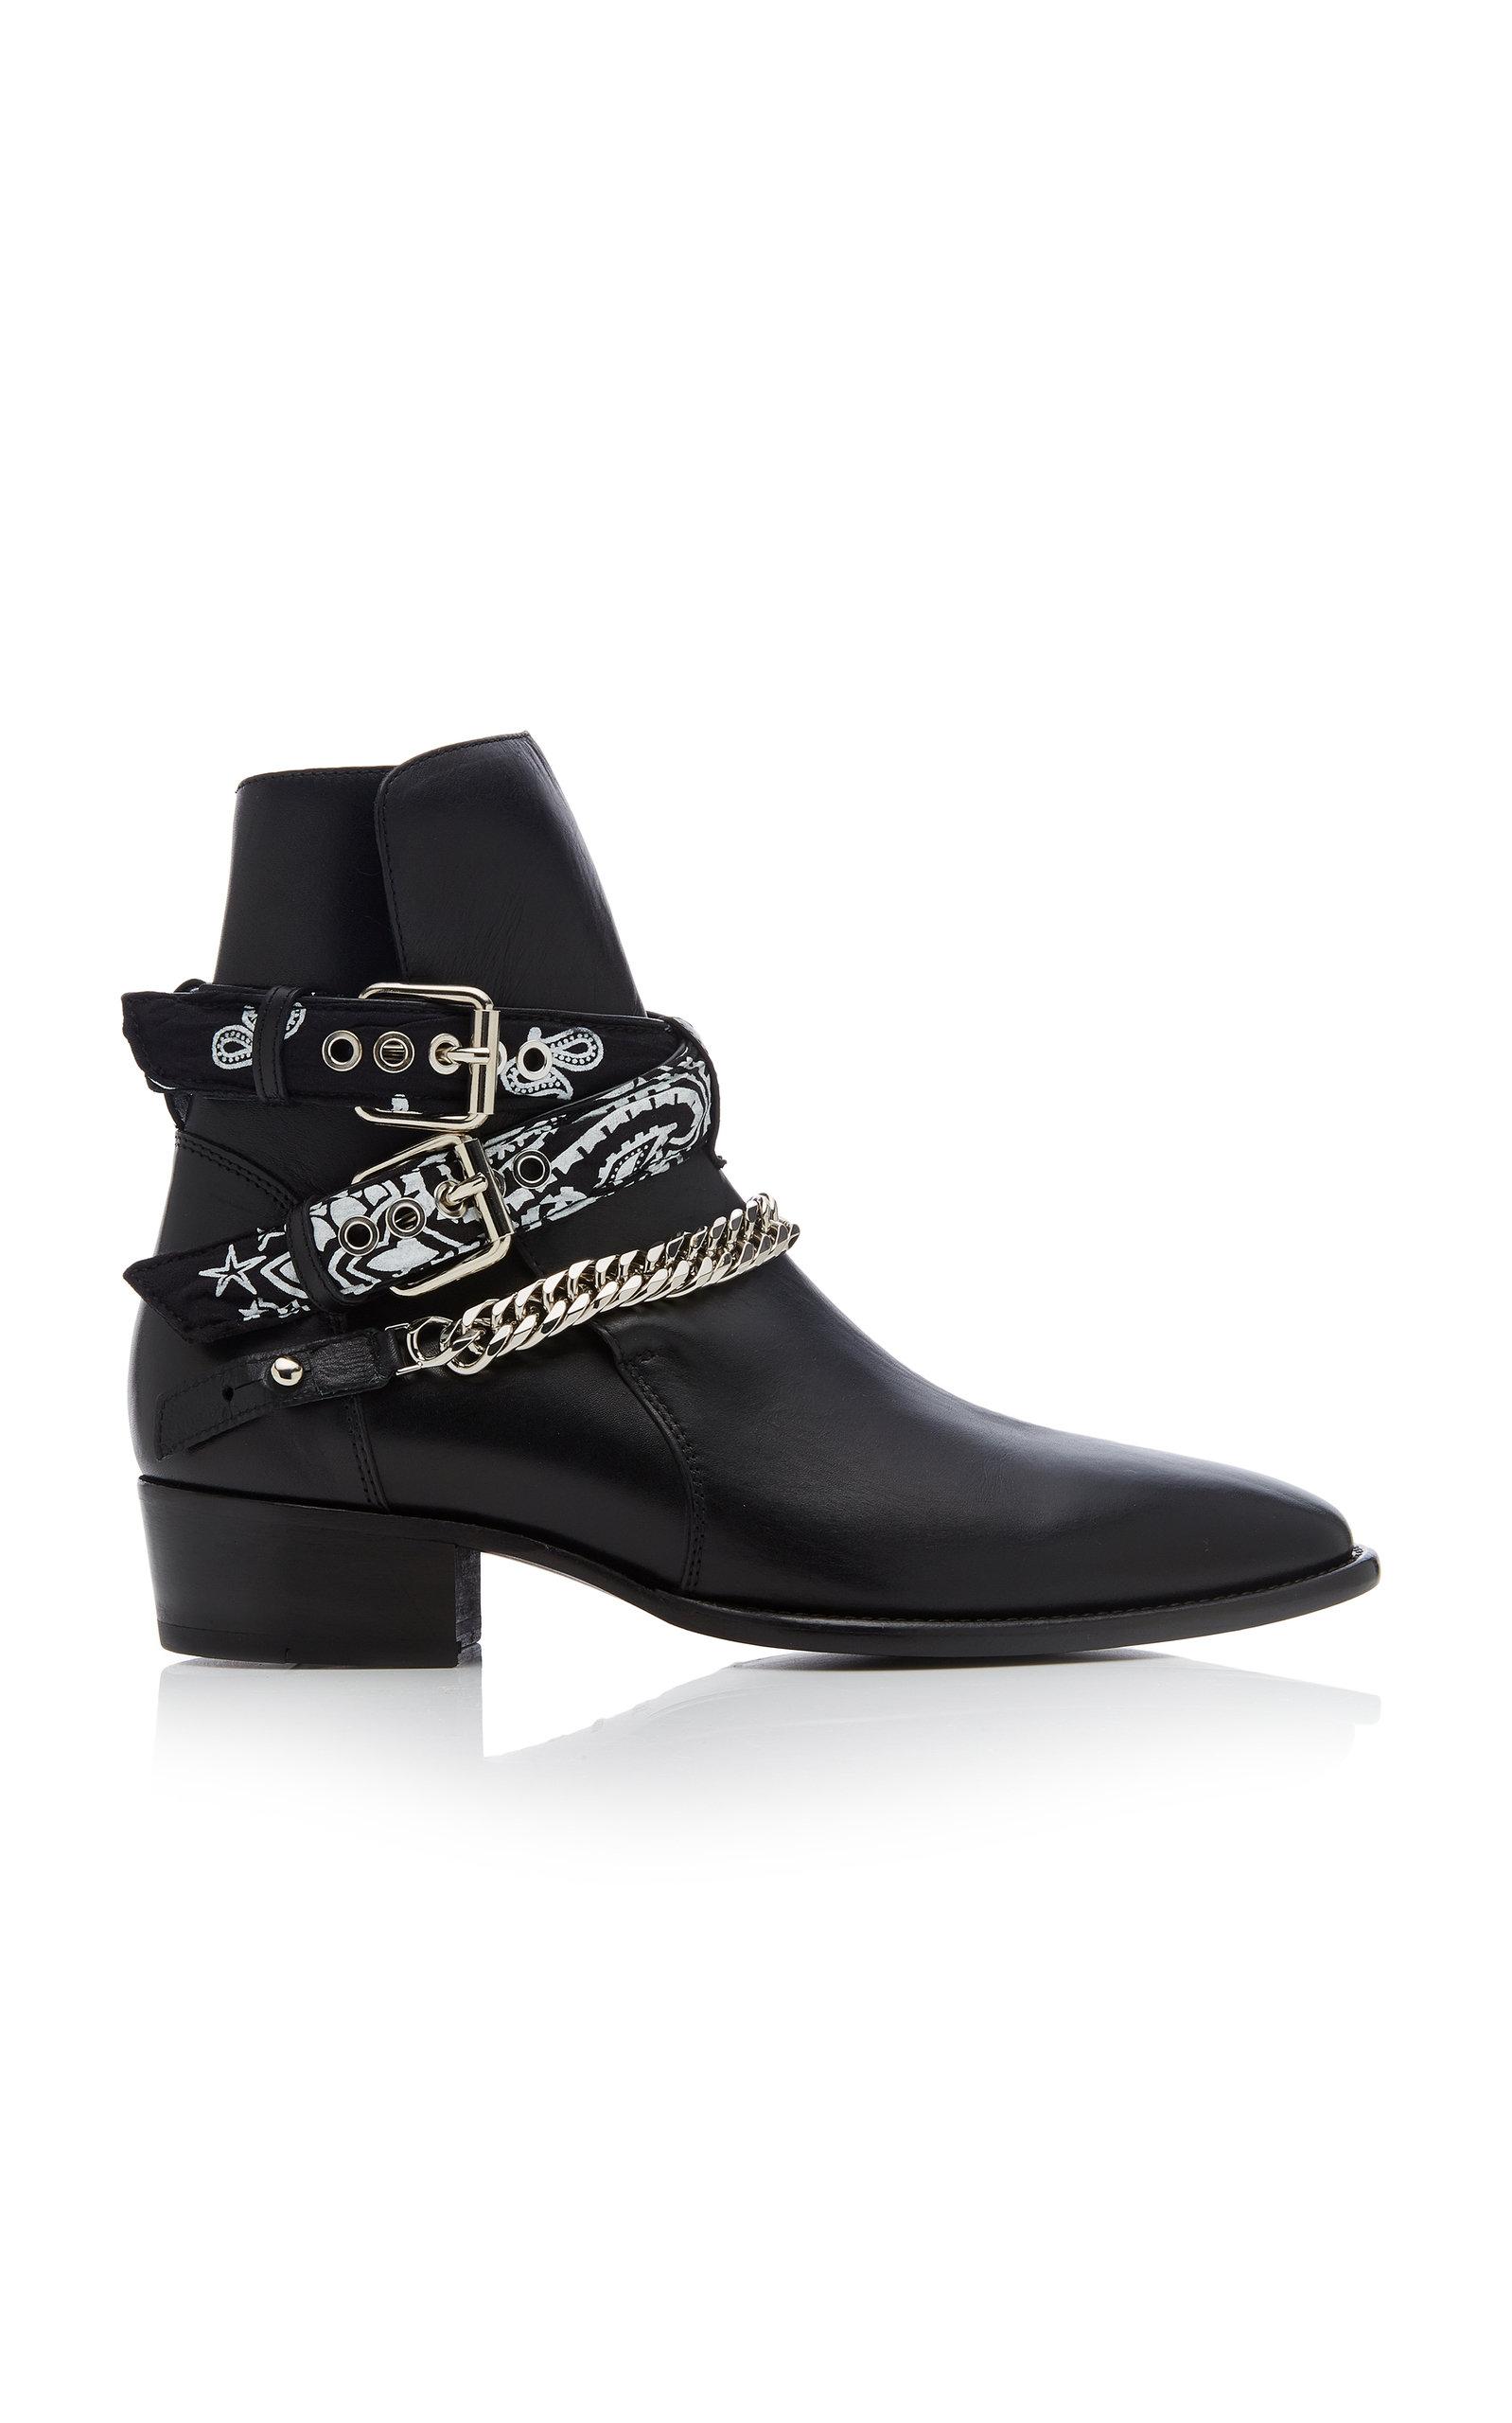 Amiri Buckled Leather Boots in Black for Men - Lyst